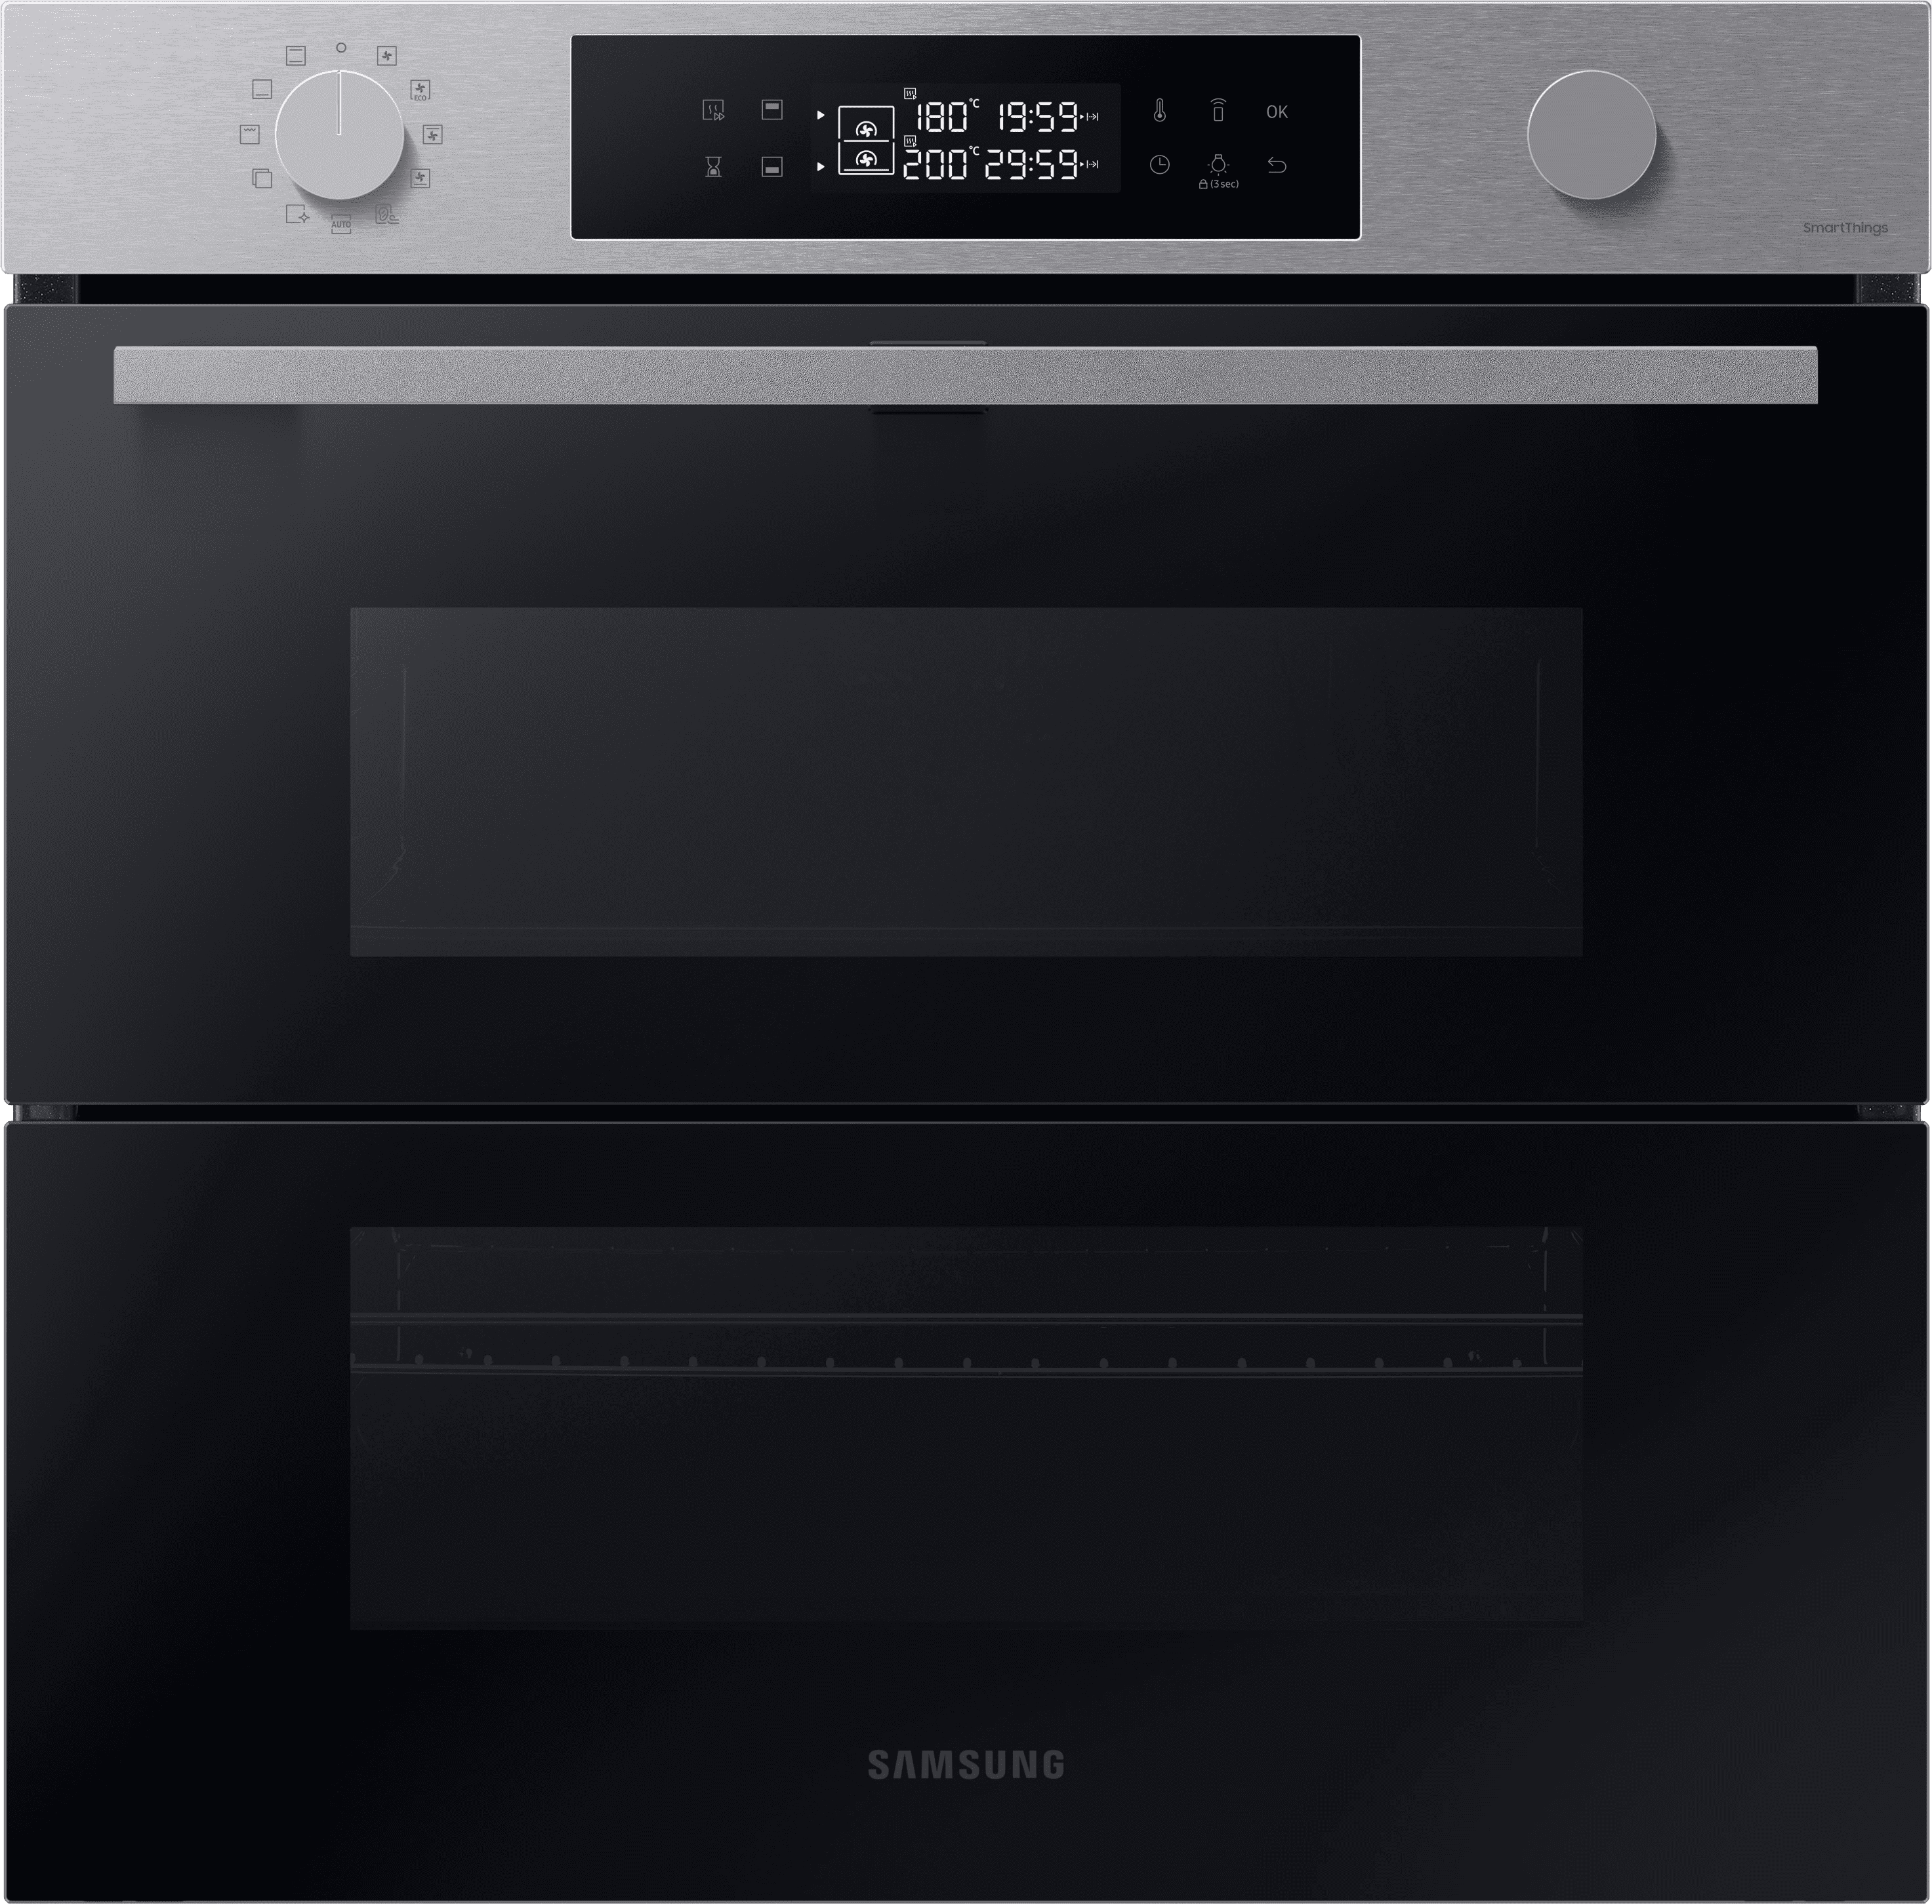 Samsung Series 4 Dual Cook Flex NV7B45205AS Wifi Connected Built In Electric Single Oven - Stainless Steel - A+ Rated, Stainless Steel